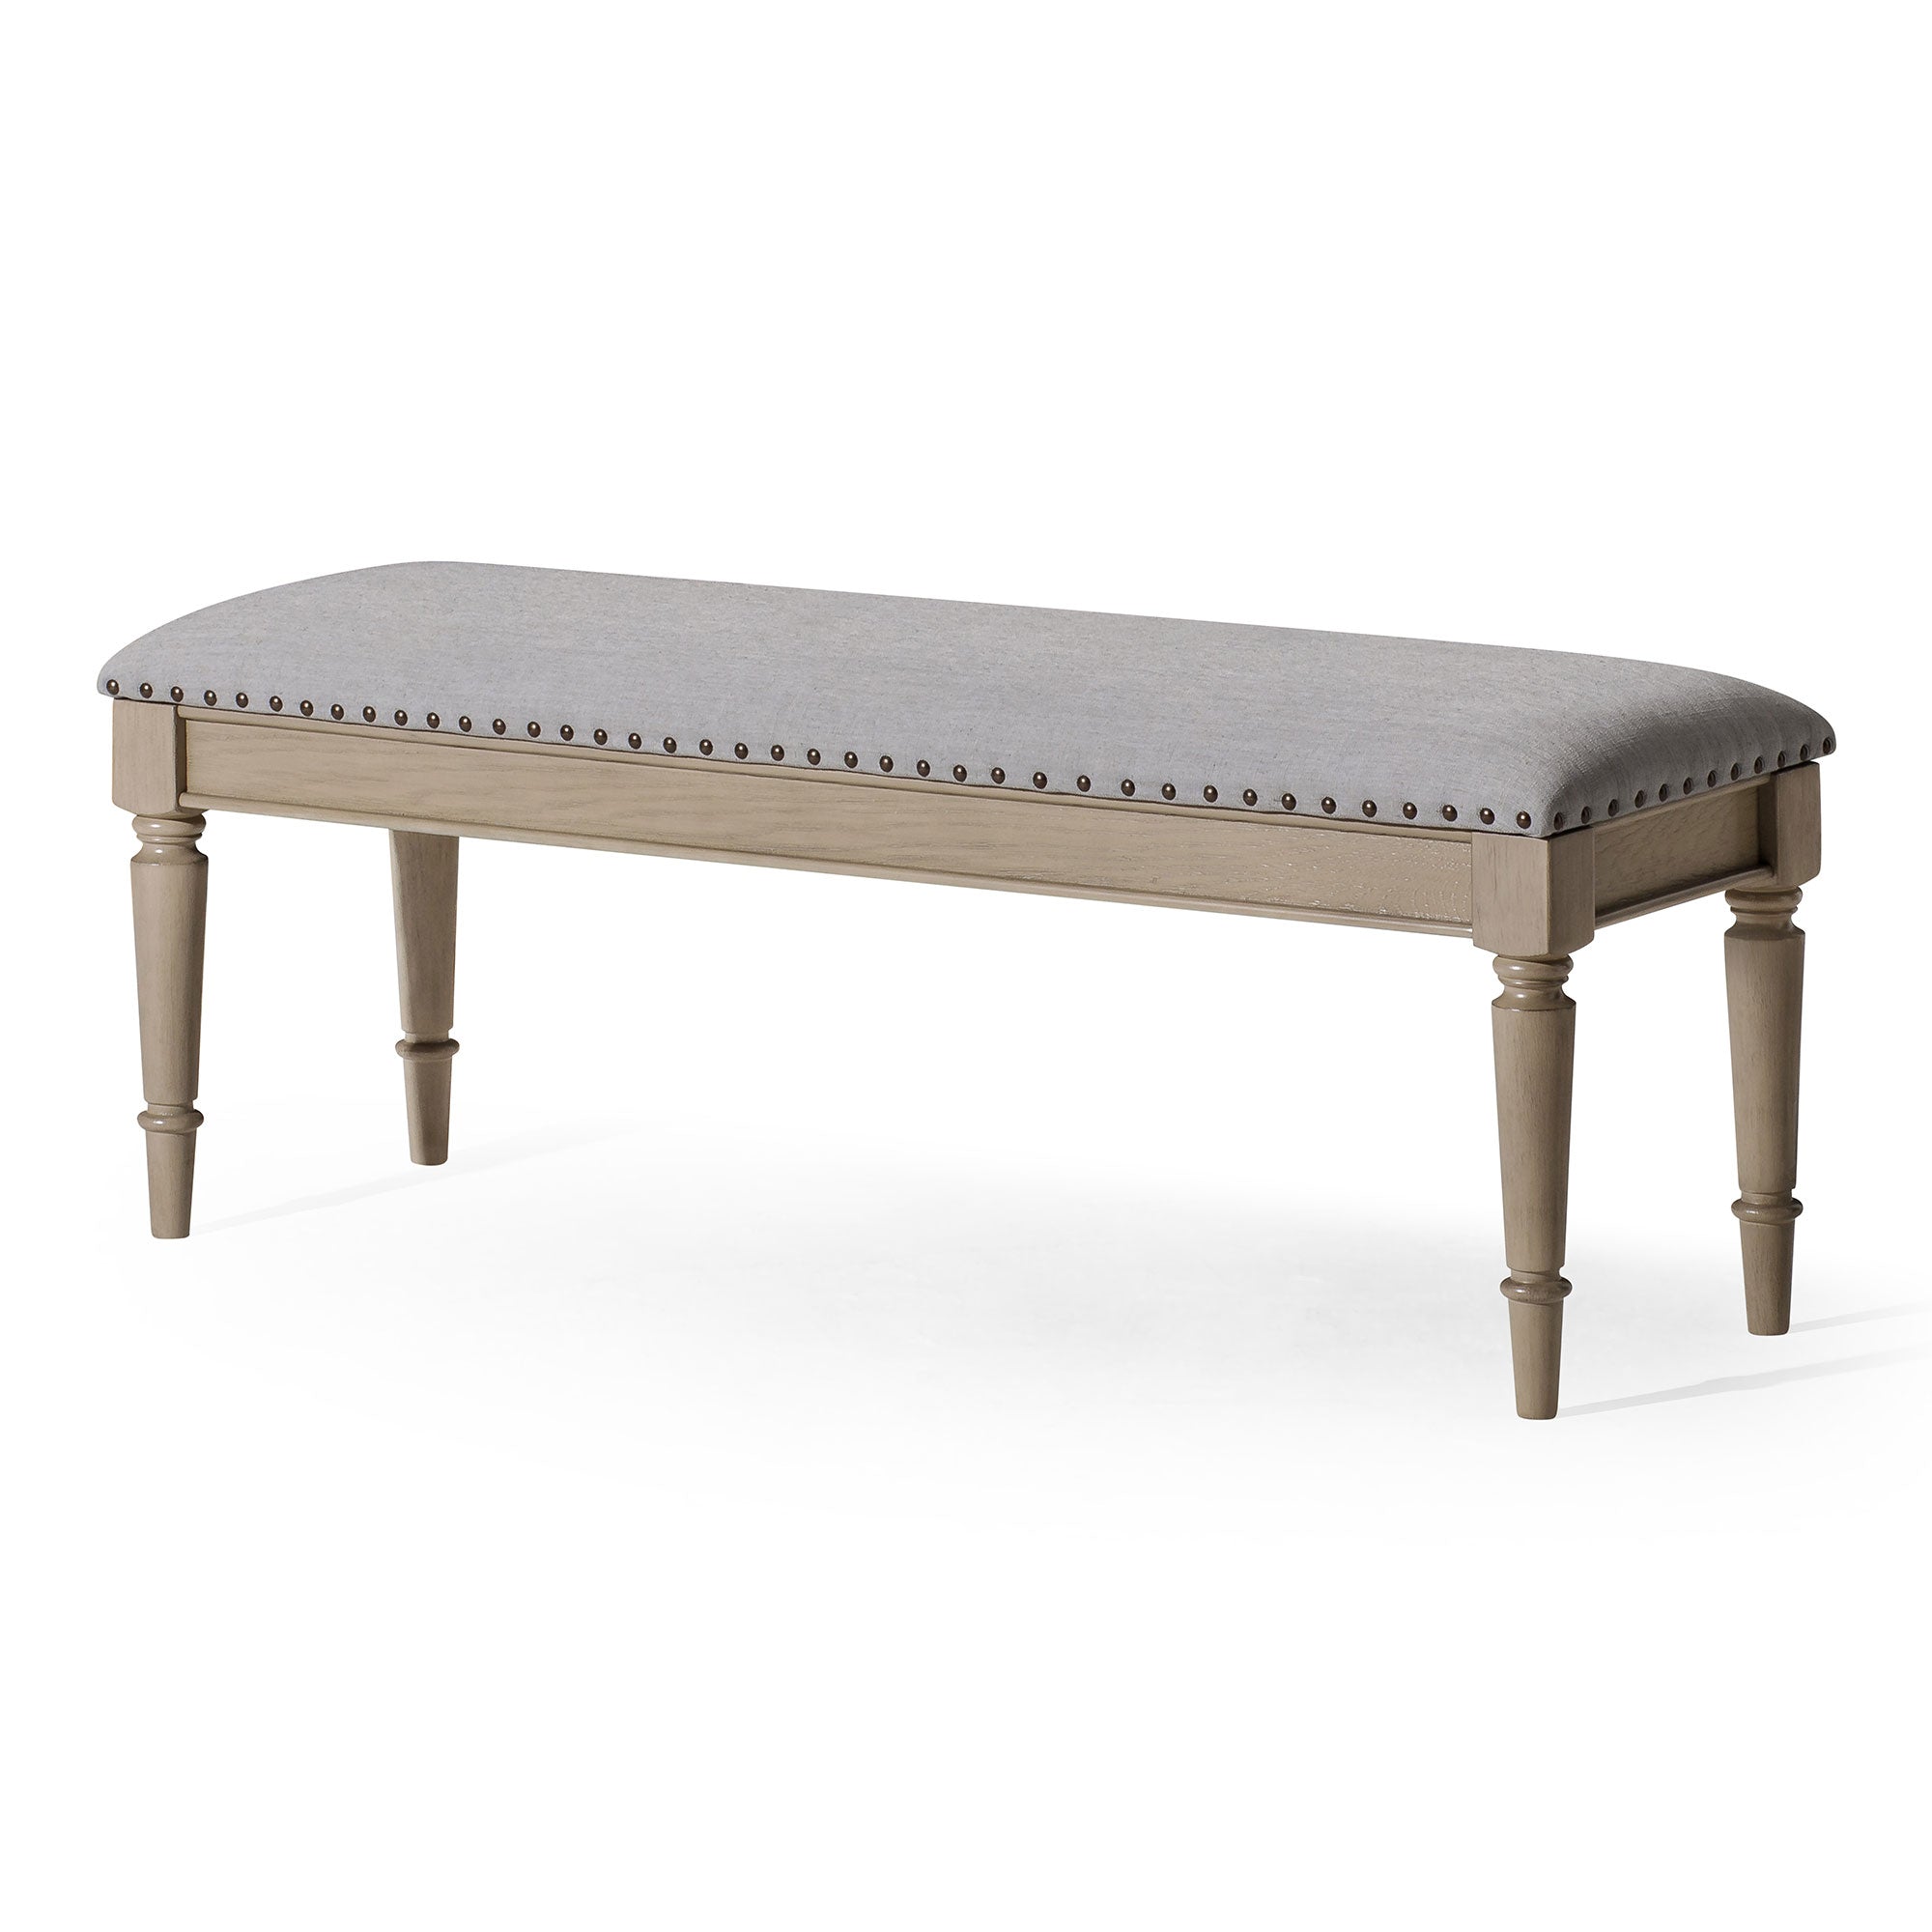 Elizabeth Classical Upholstered Wooden Bench in Antiqued Grey Finish in Ottomans & Benches by Maven Lane